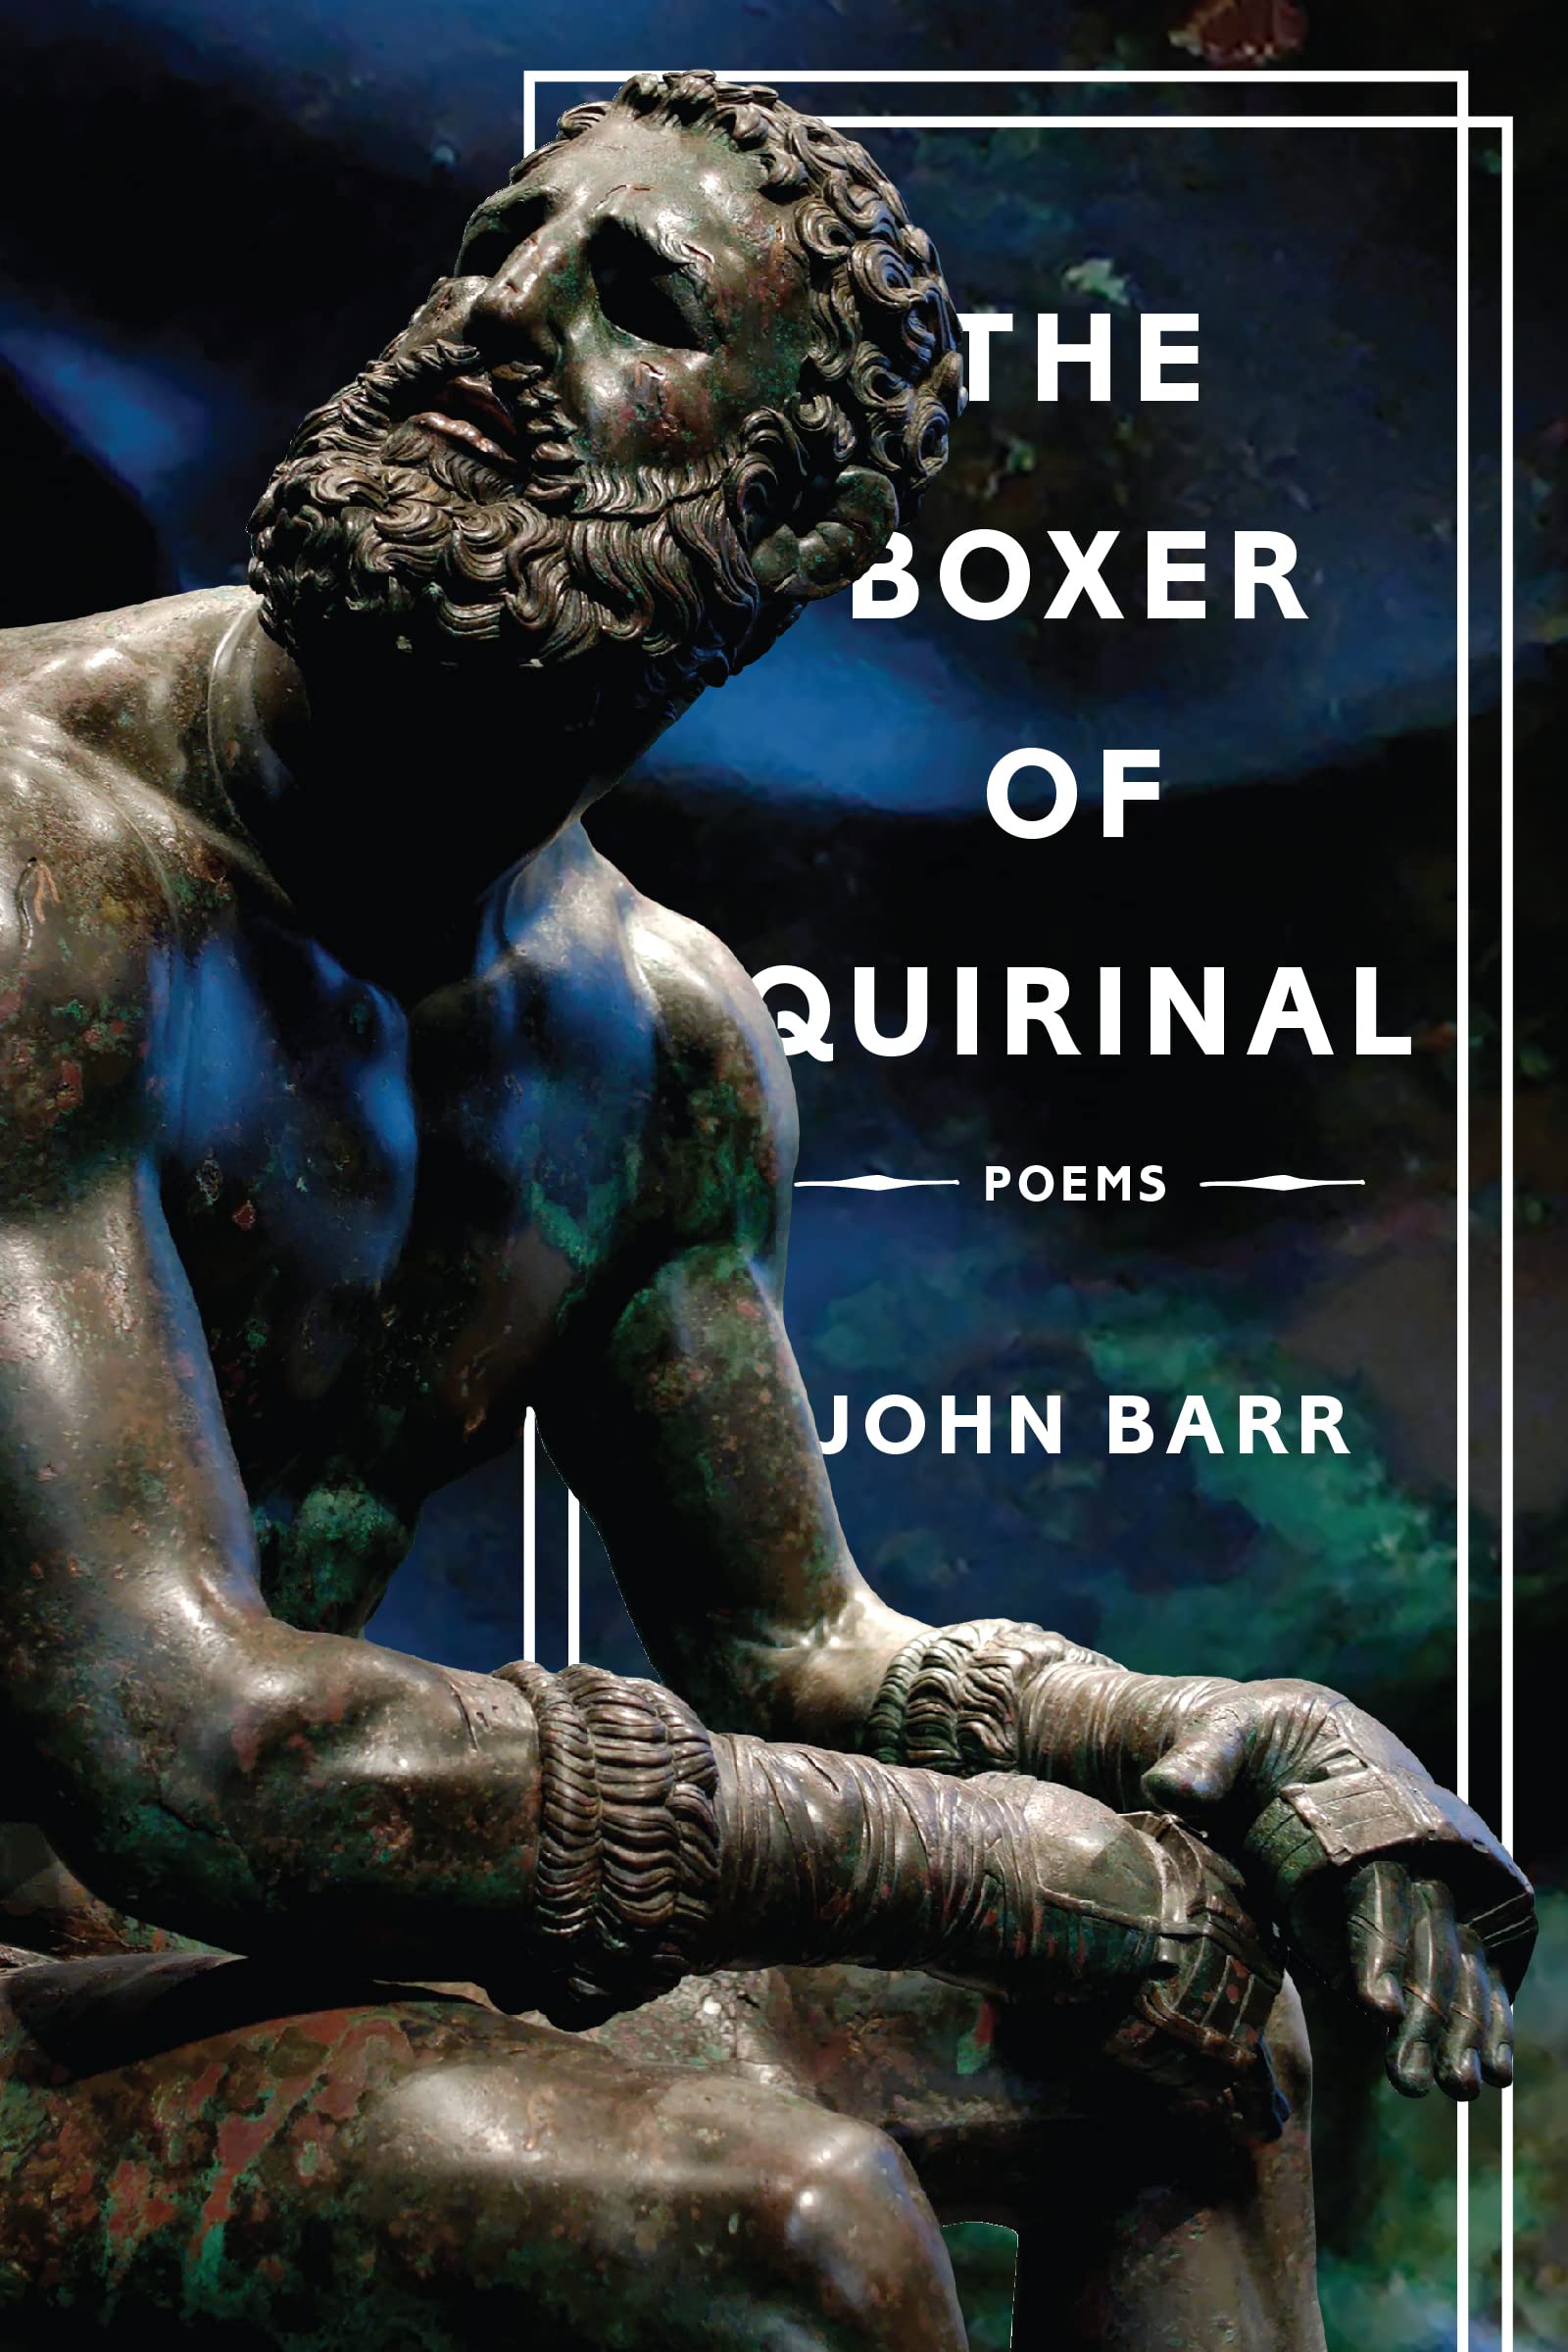 The Boxer of Quirinal